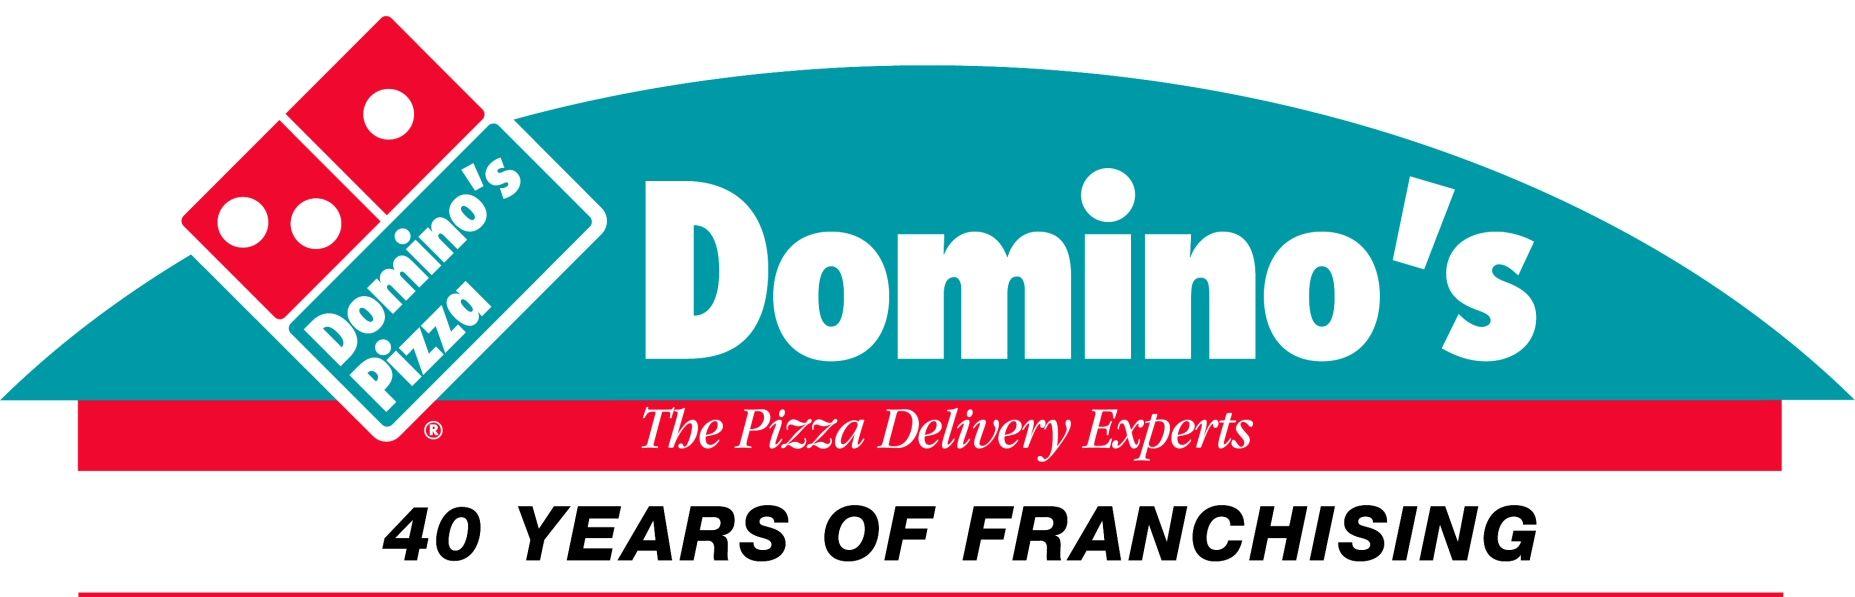 dominos logo meaning